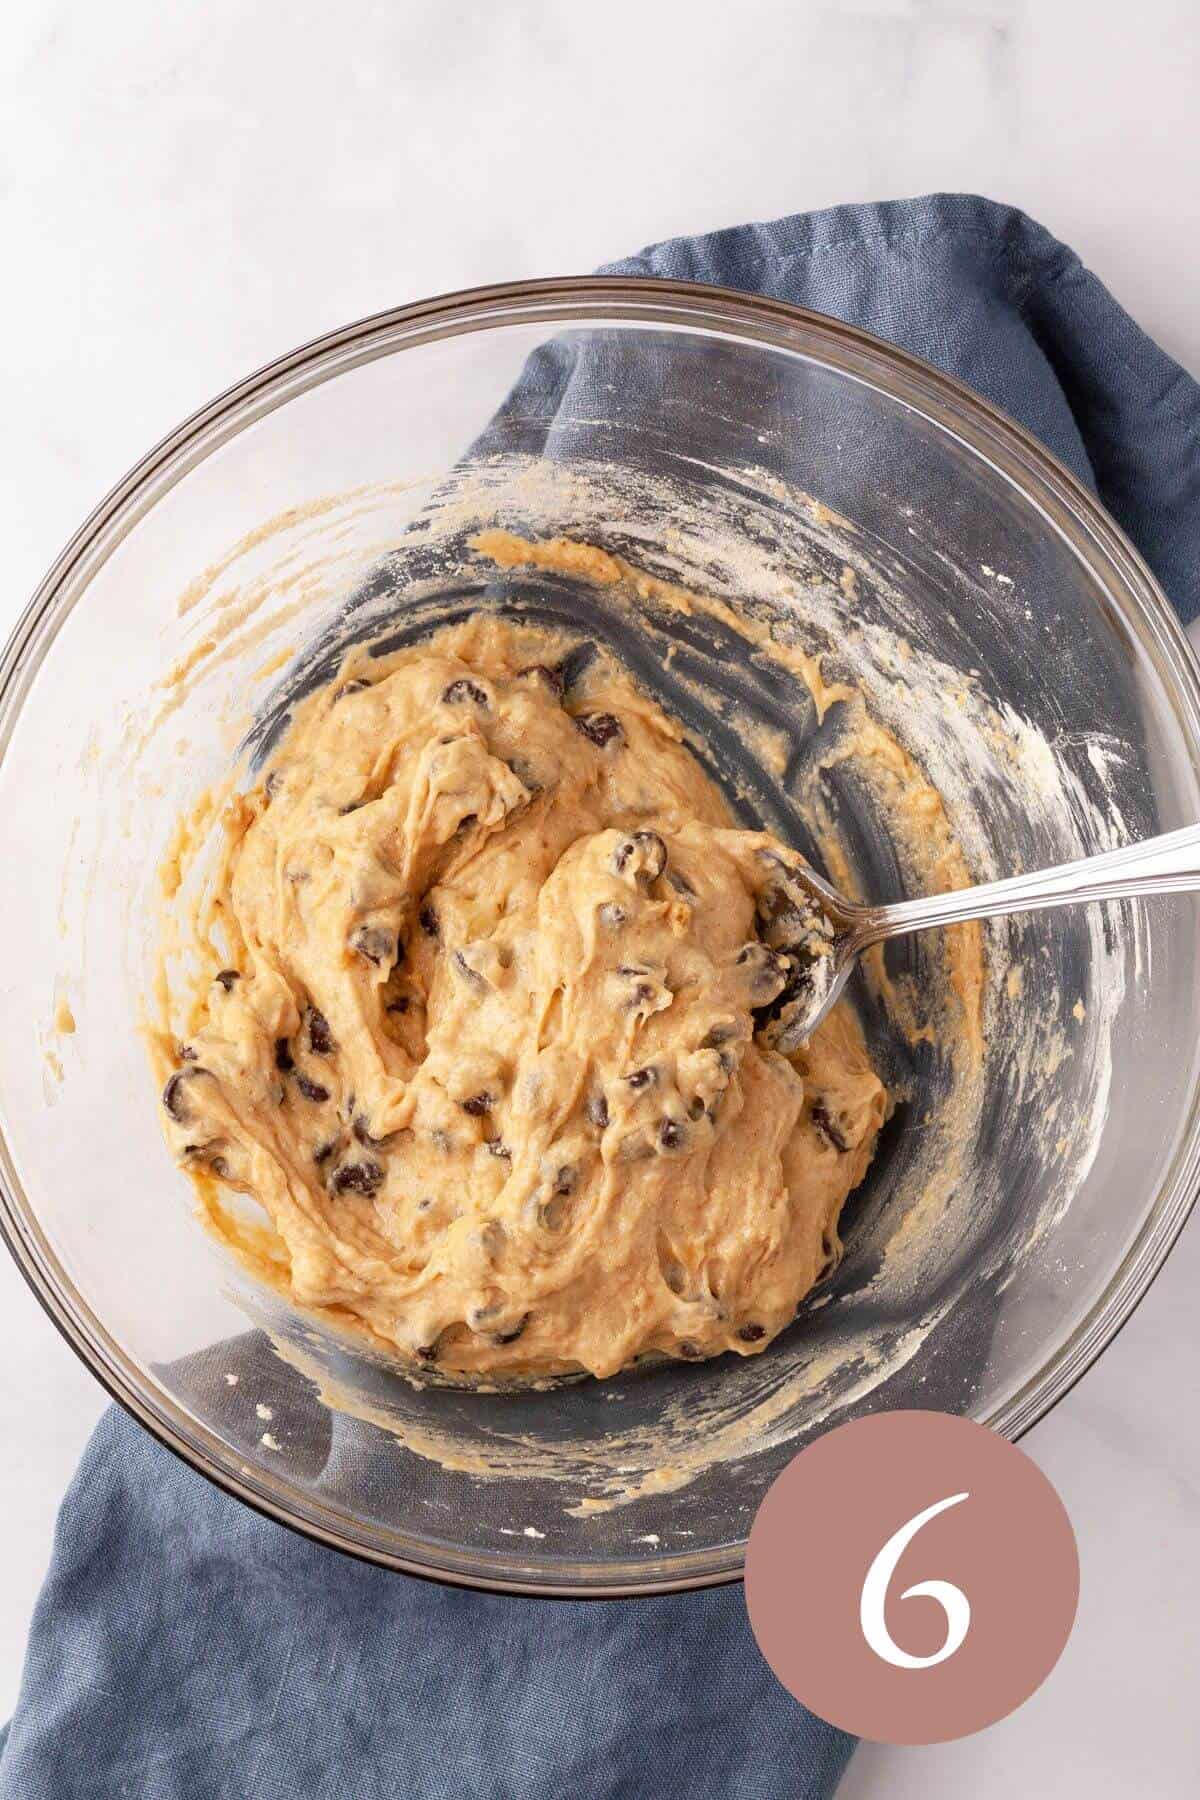 Banana tahini cookie dough with chocolate chips in bowl